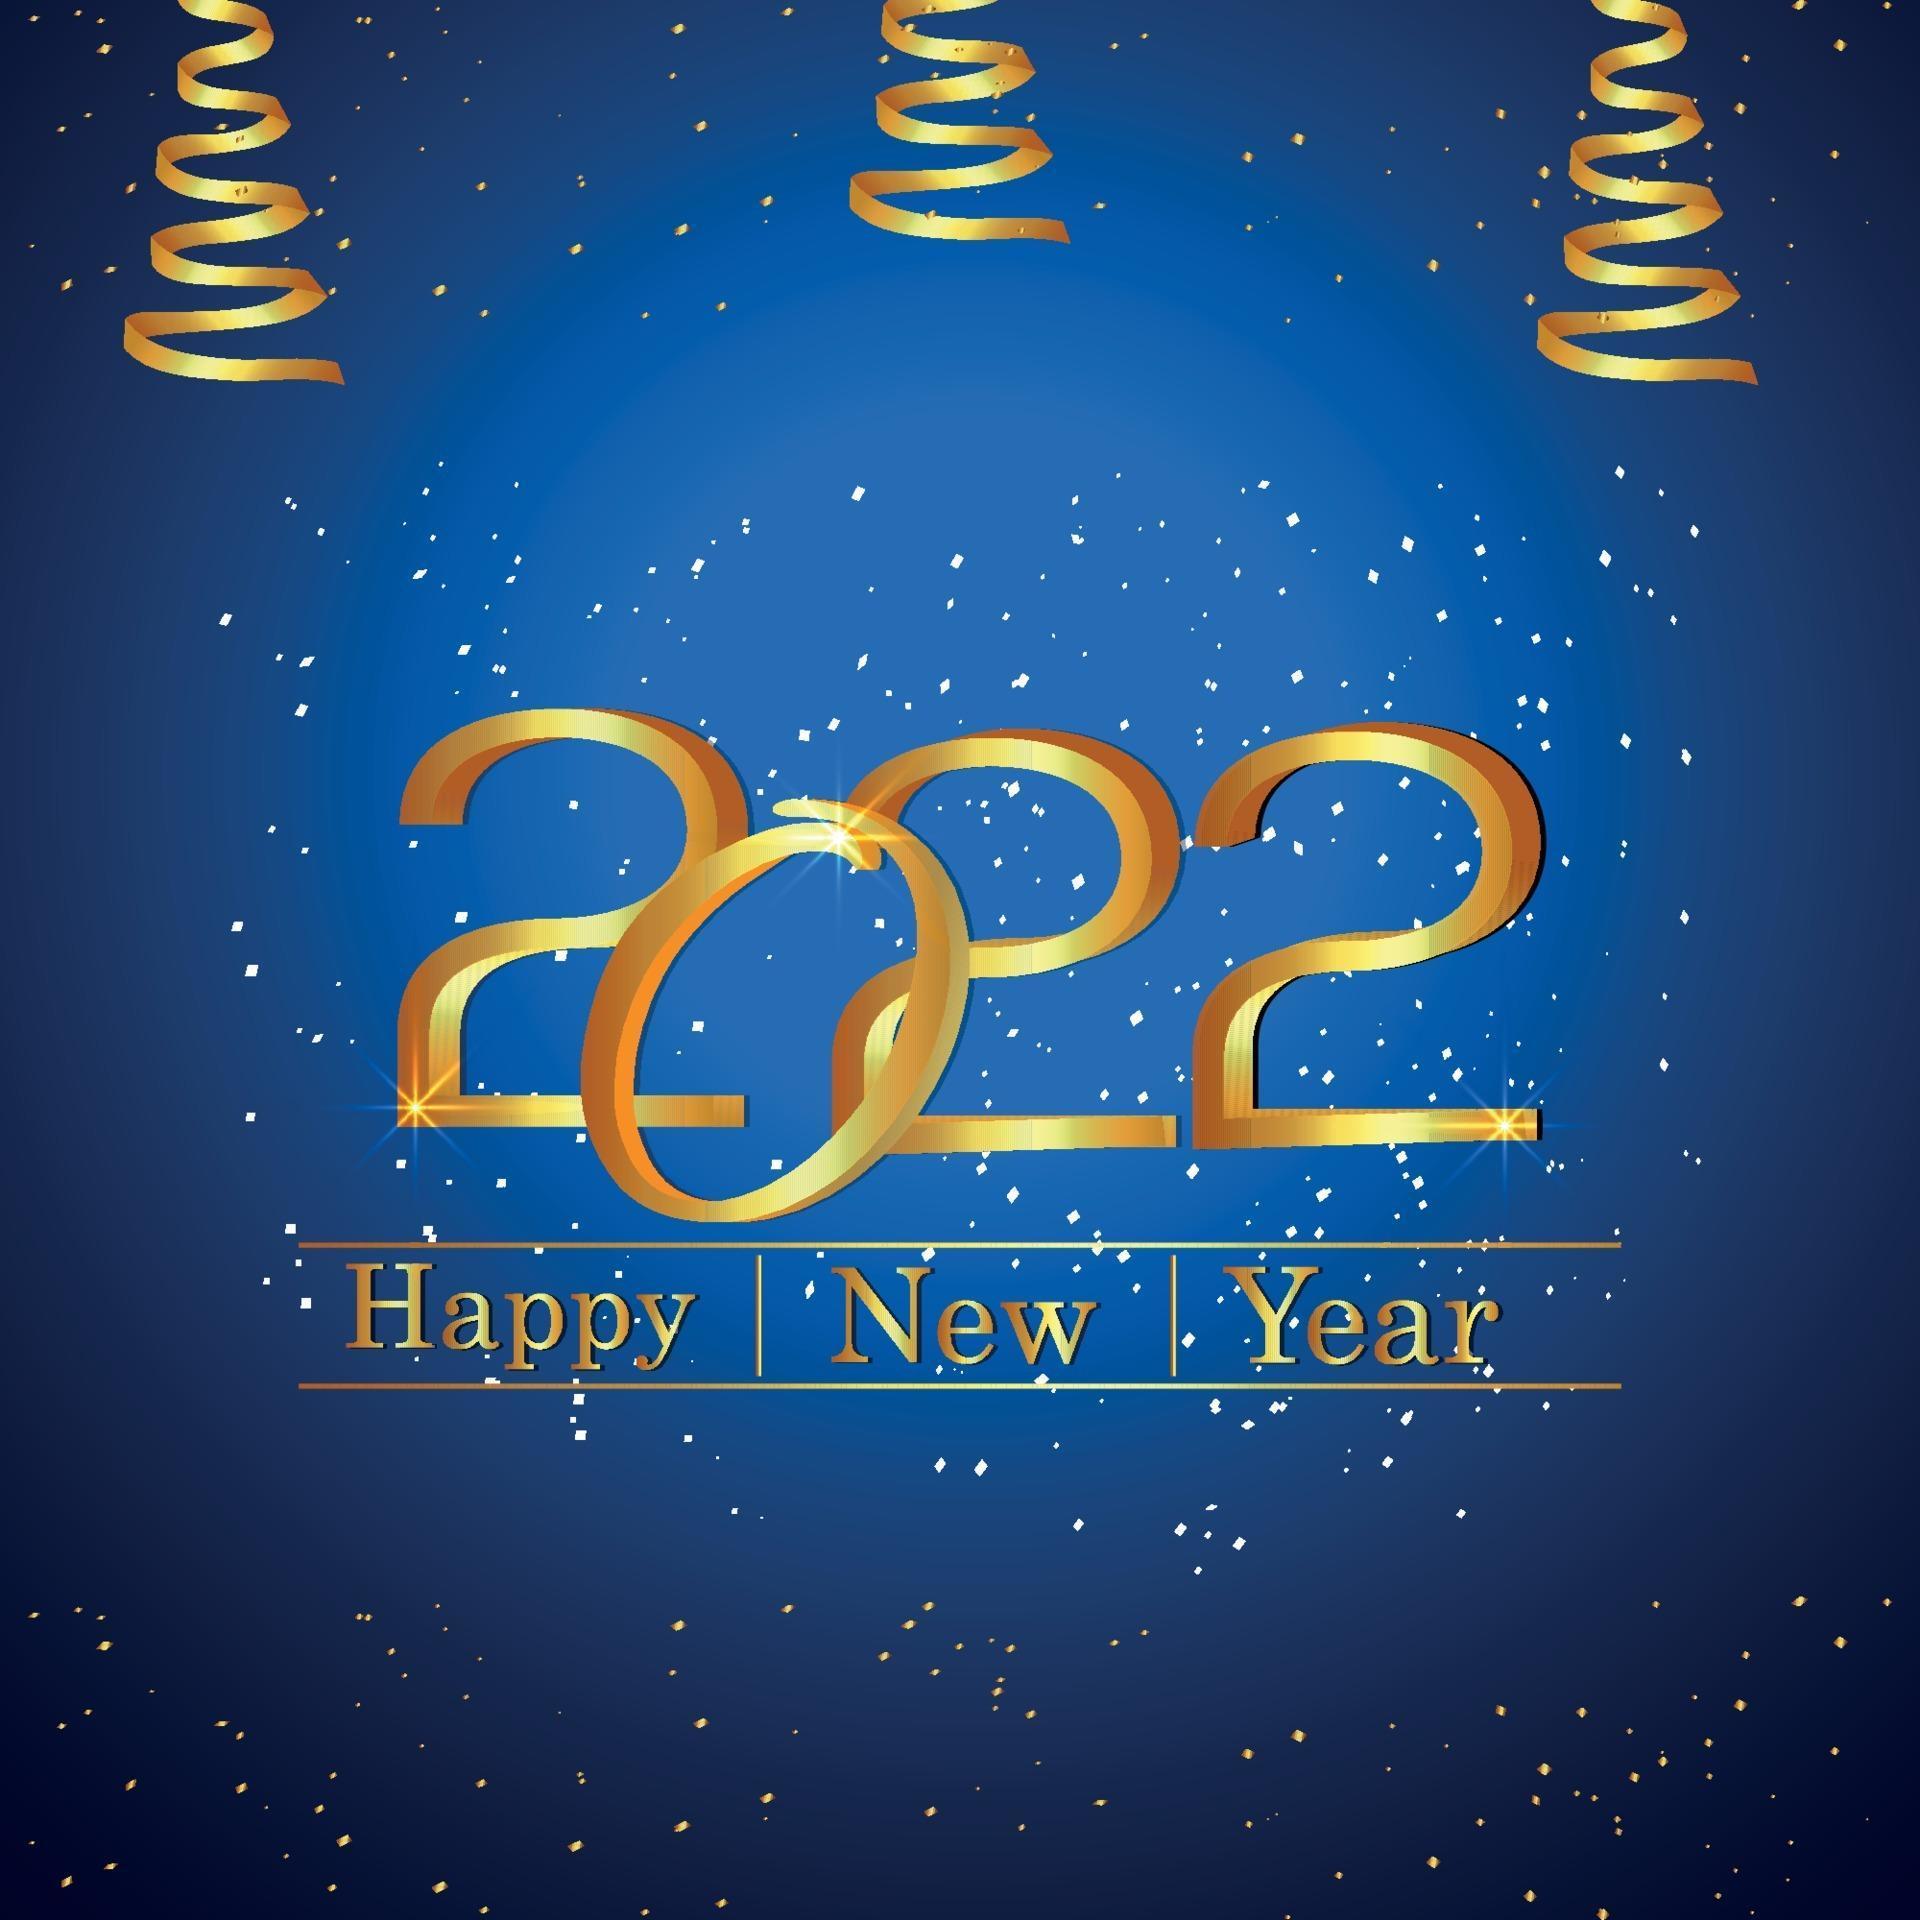 2022 happy new year golden text effect on creative